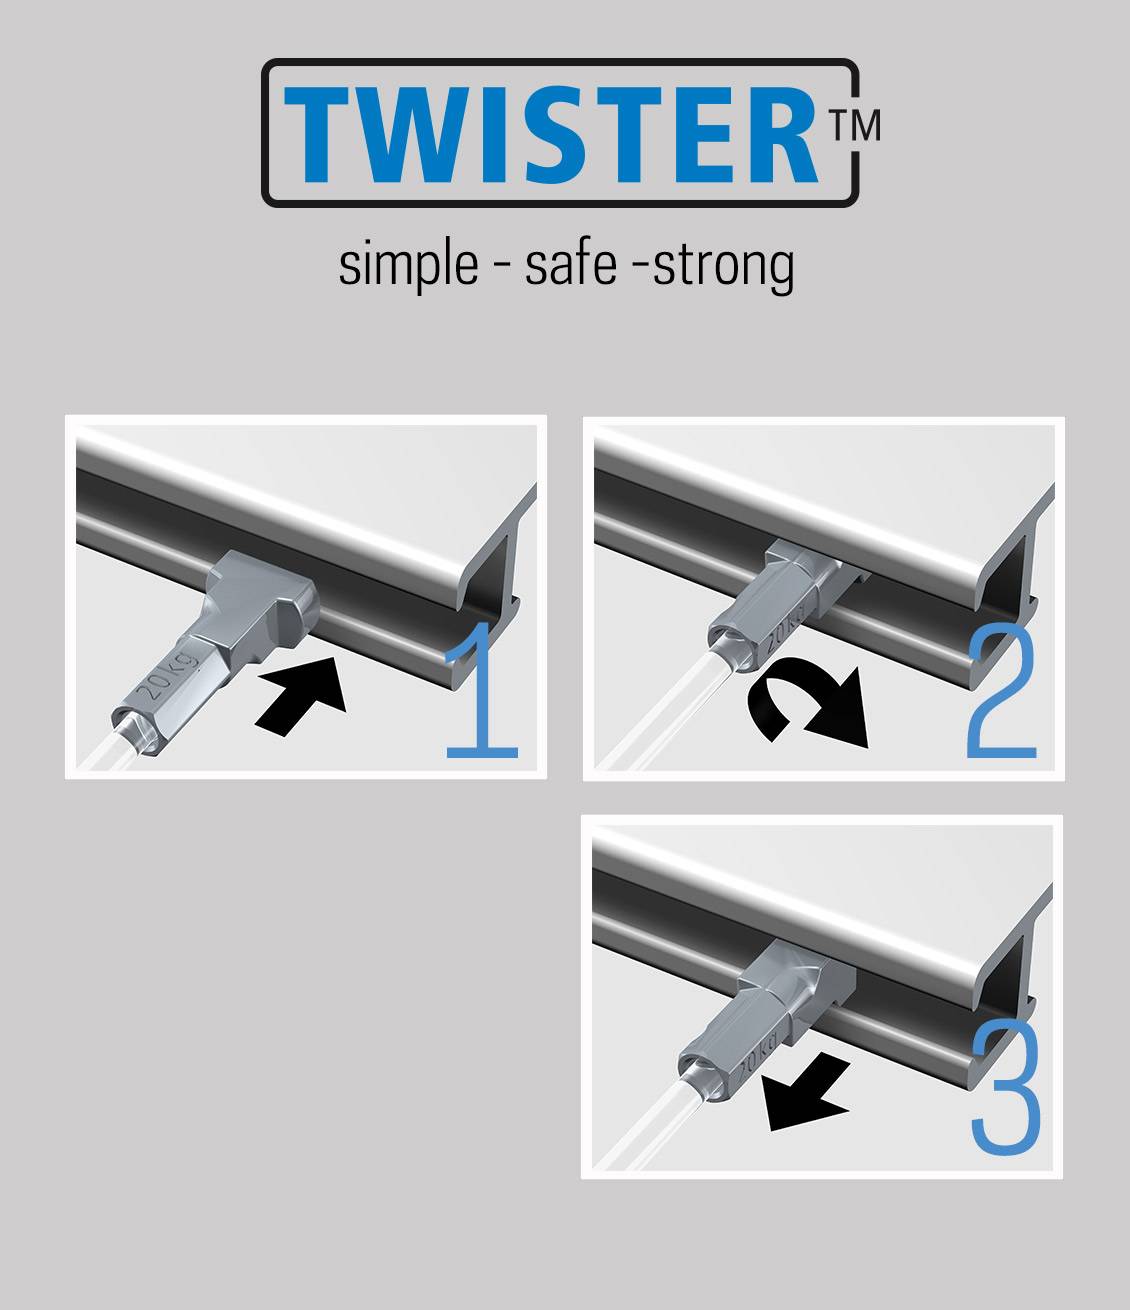 ARTITEQ Twister Hanging Wire 1mm – Hanging Systems